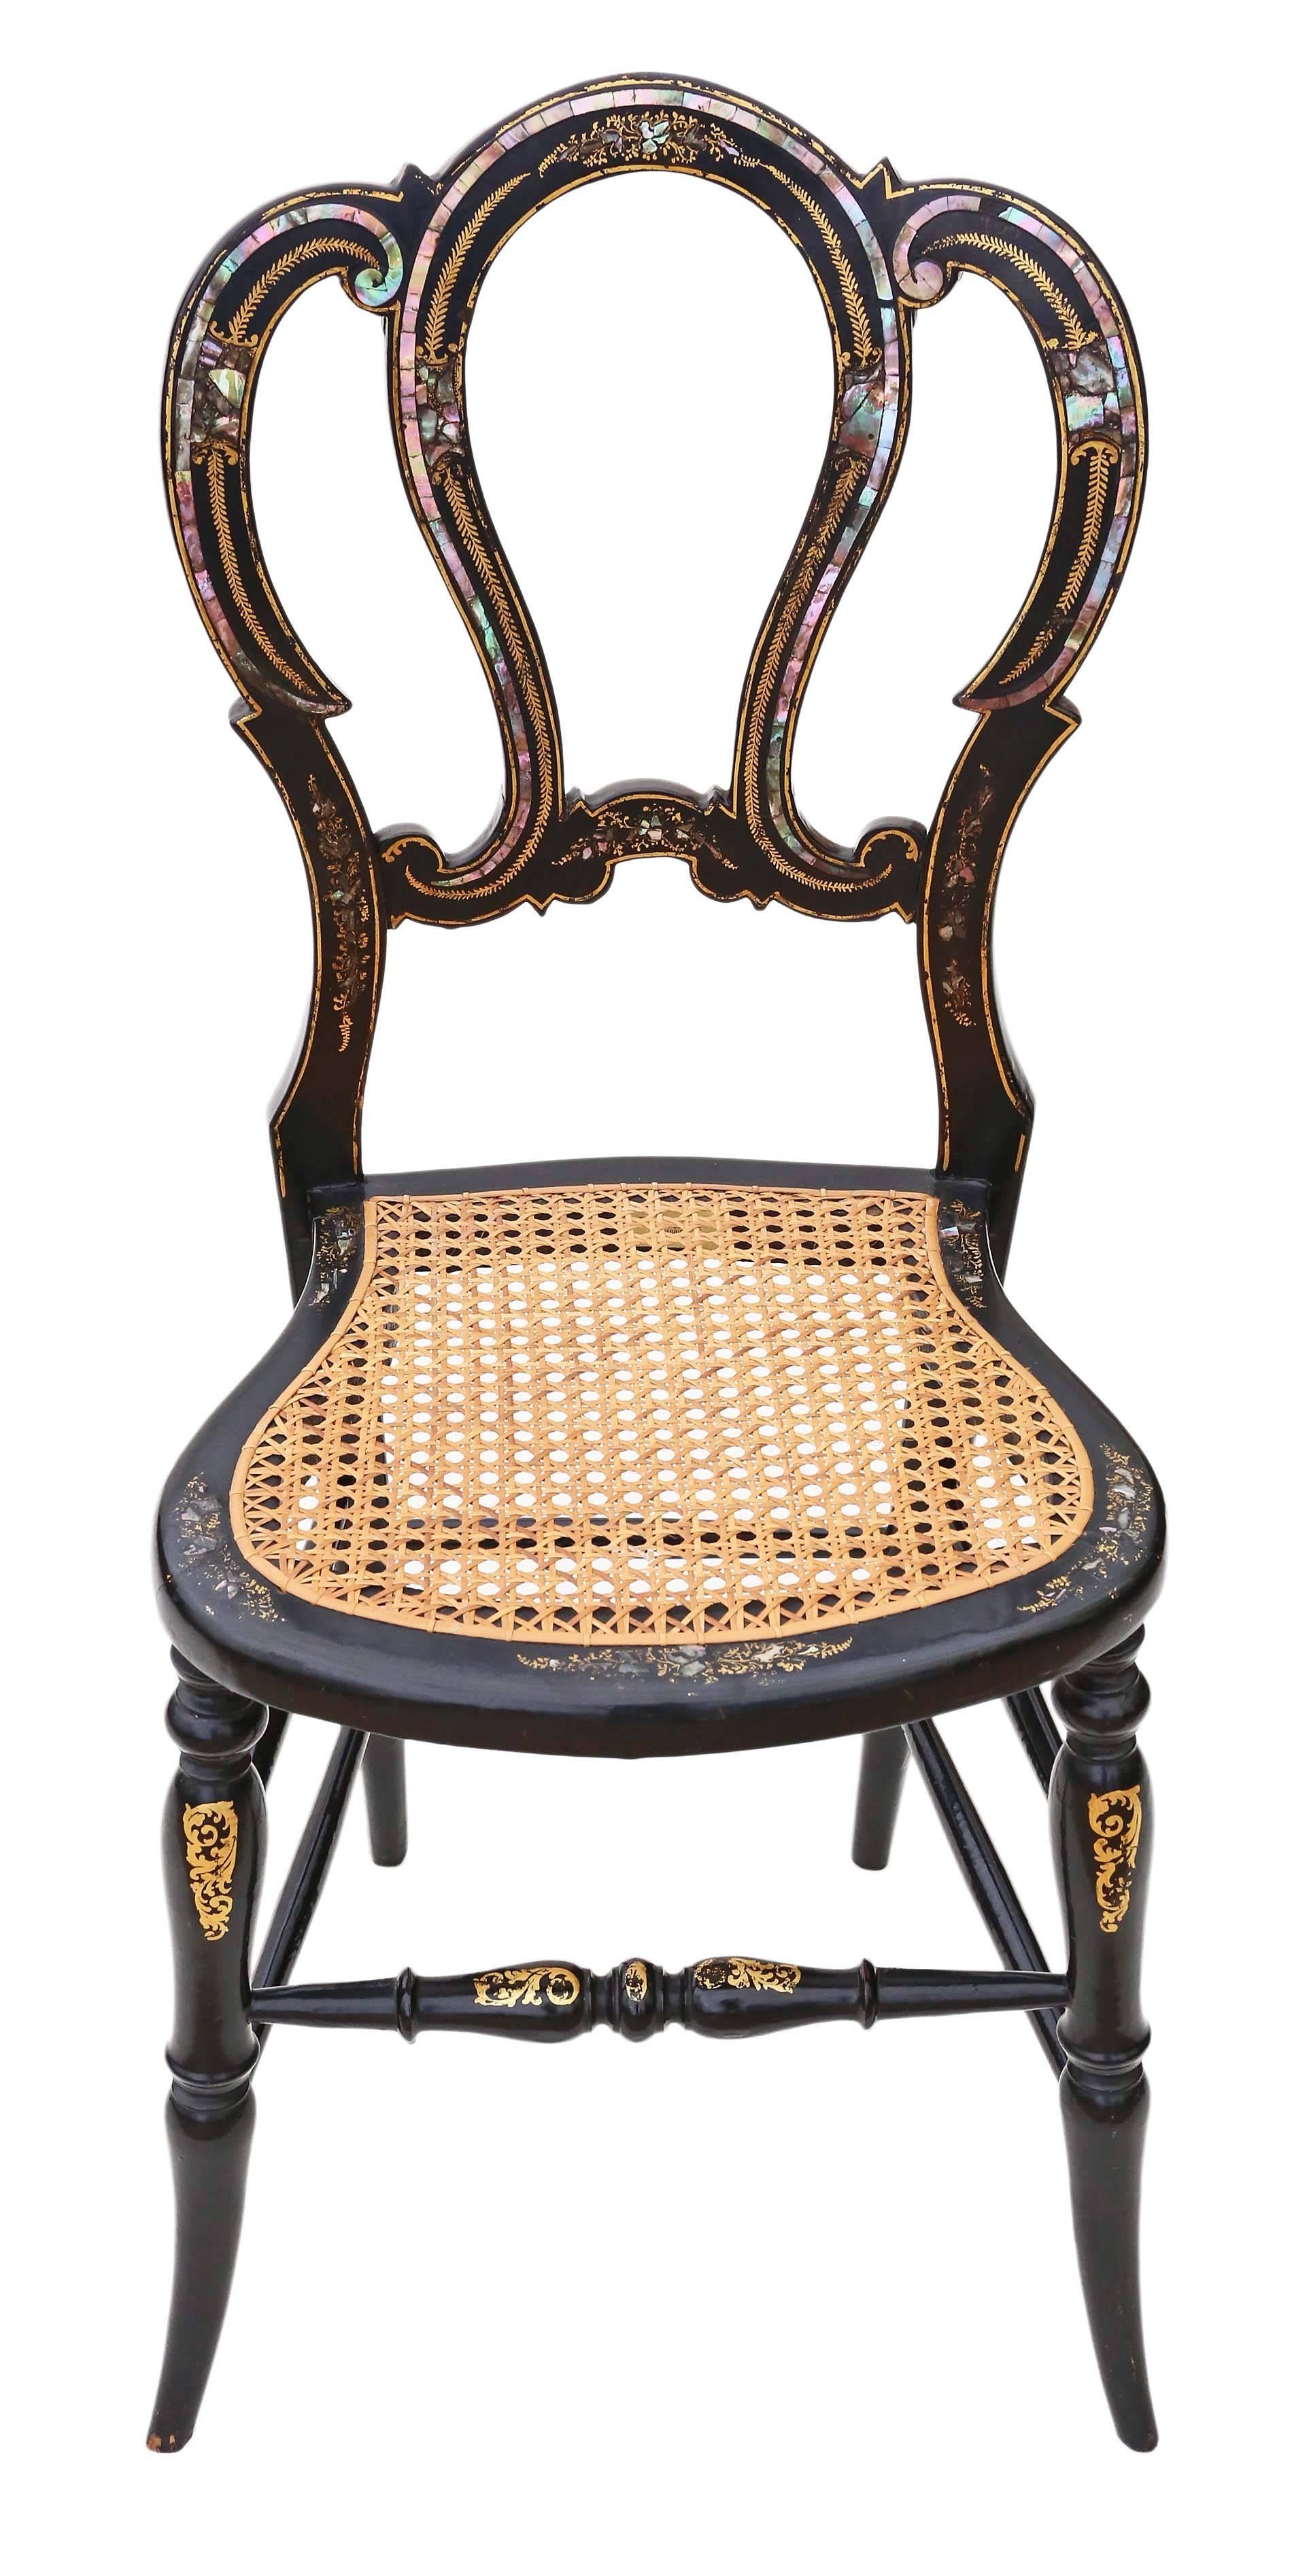 Antique rare Victorian ebonized mother-of-pearl cane inlaid bedroom chair. Came from the Master's Lodge, Trinity College, Cambridge.

Dates from circa 1890. Fantastic quality decorative piece, with amazing inlays and gilt paint